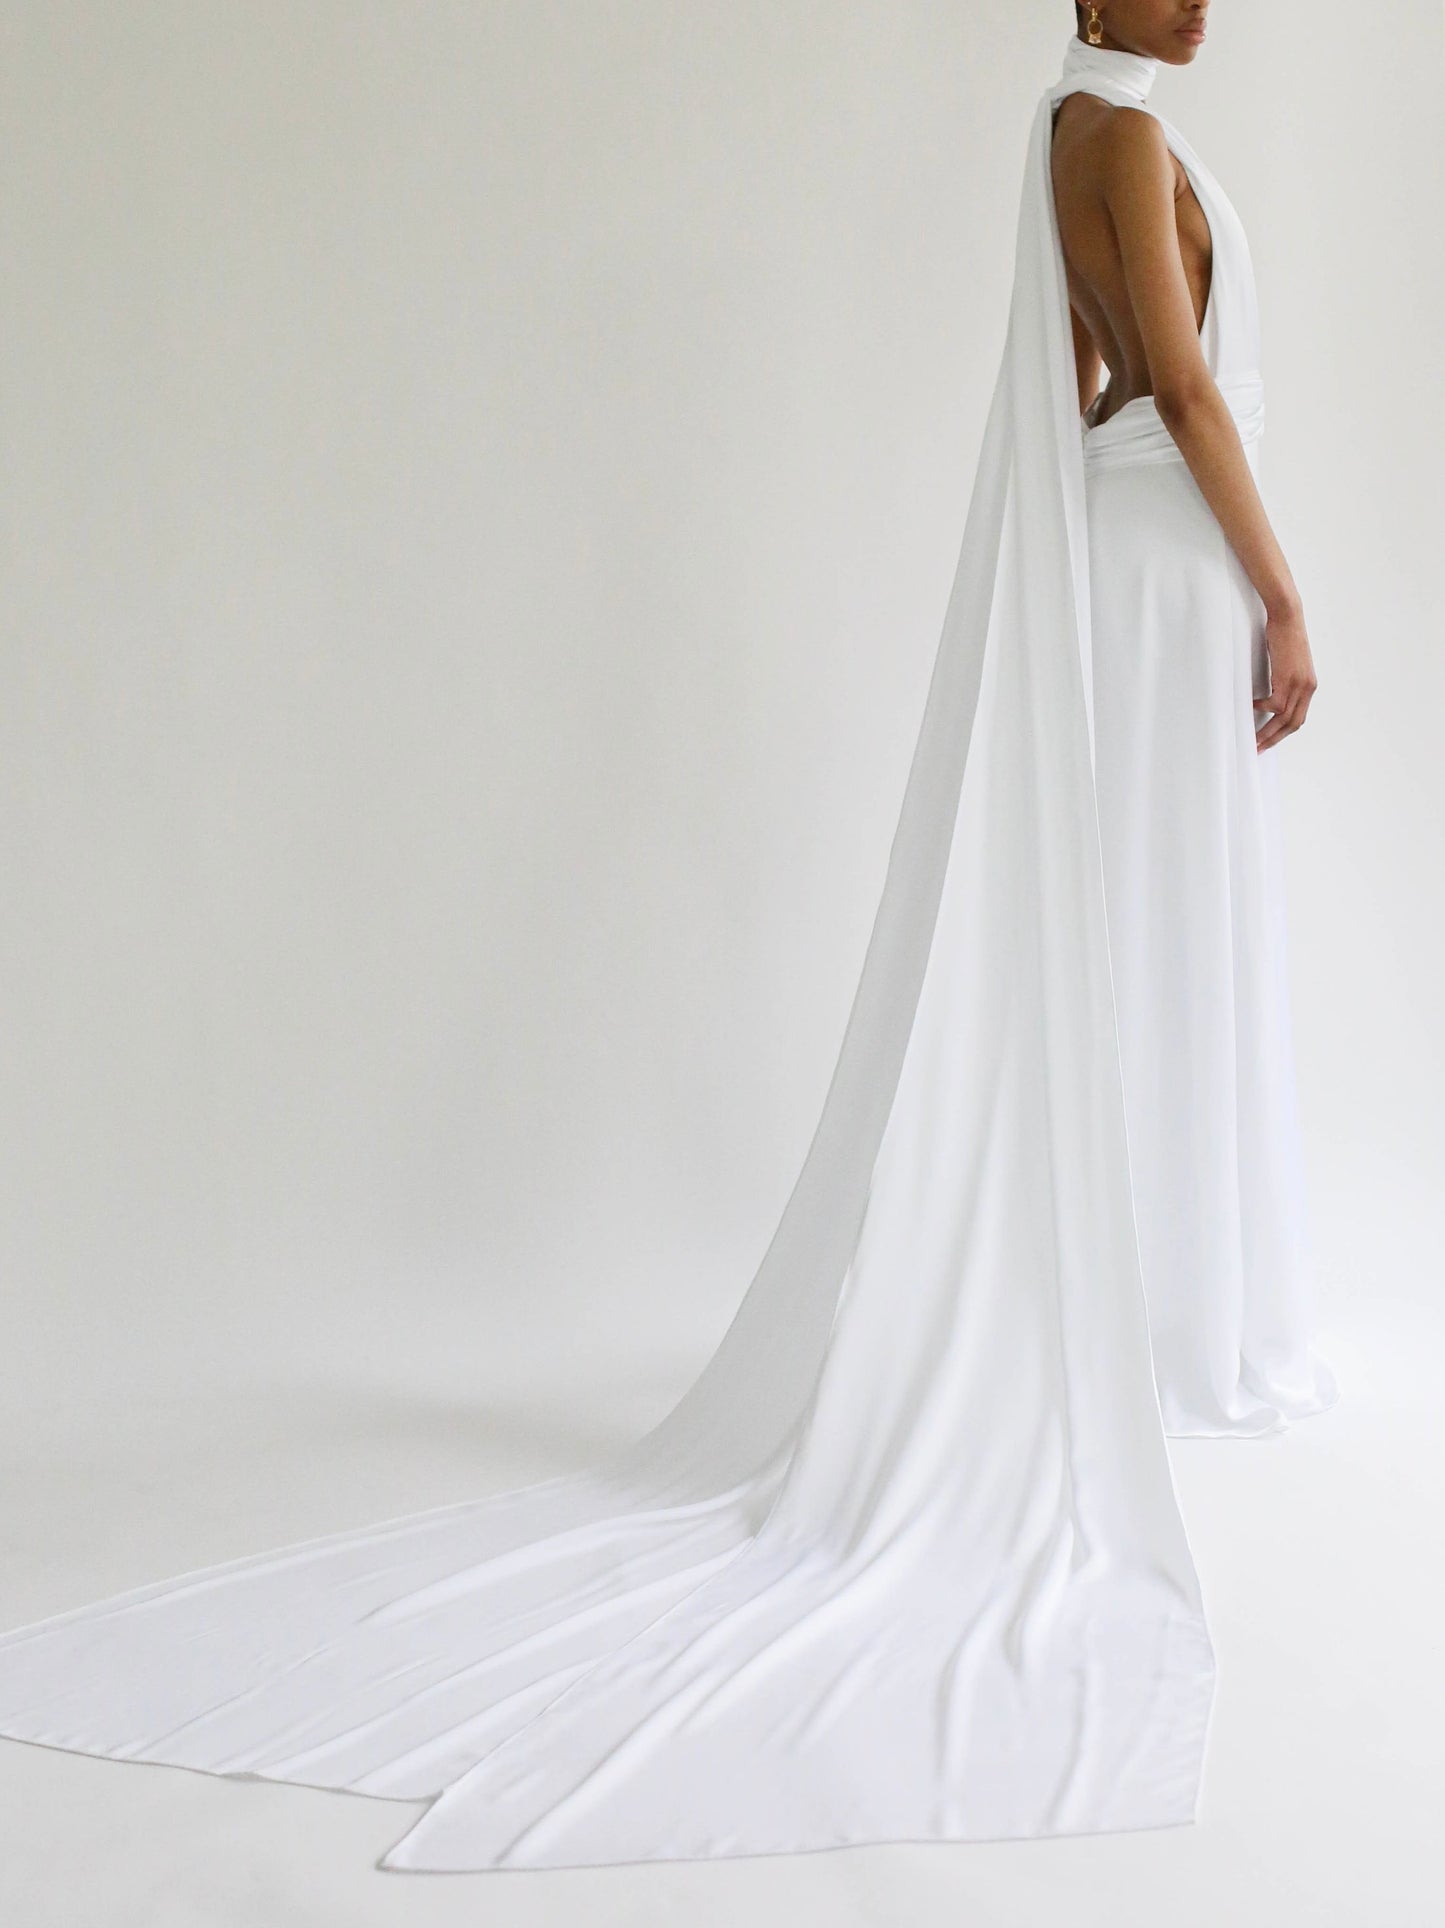 Step into elegance with the Jervoise for P.S. Danielle wedding dress